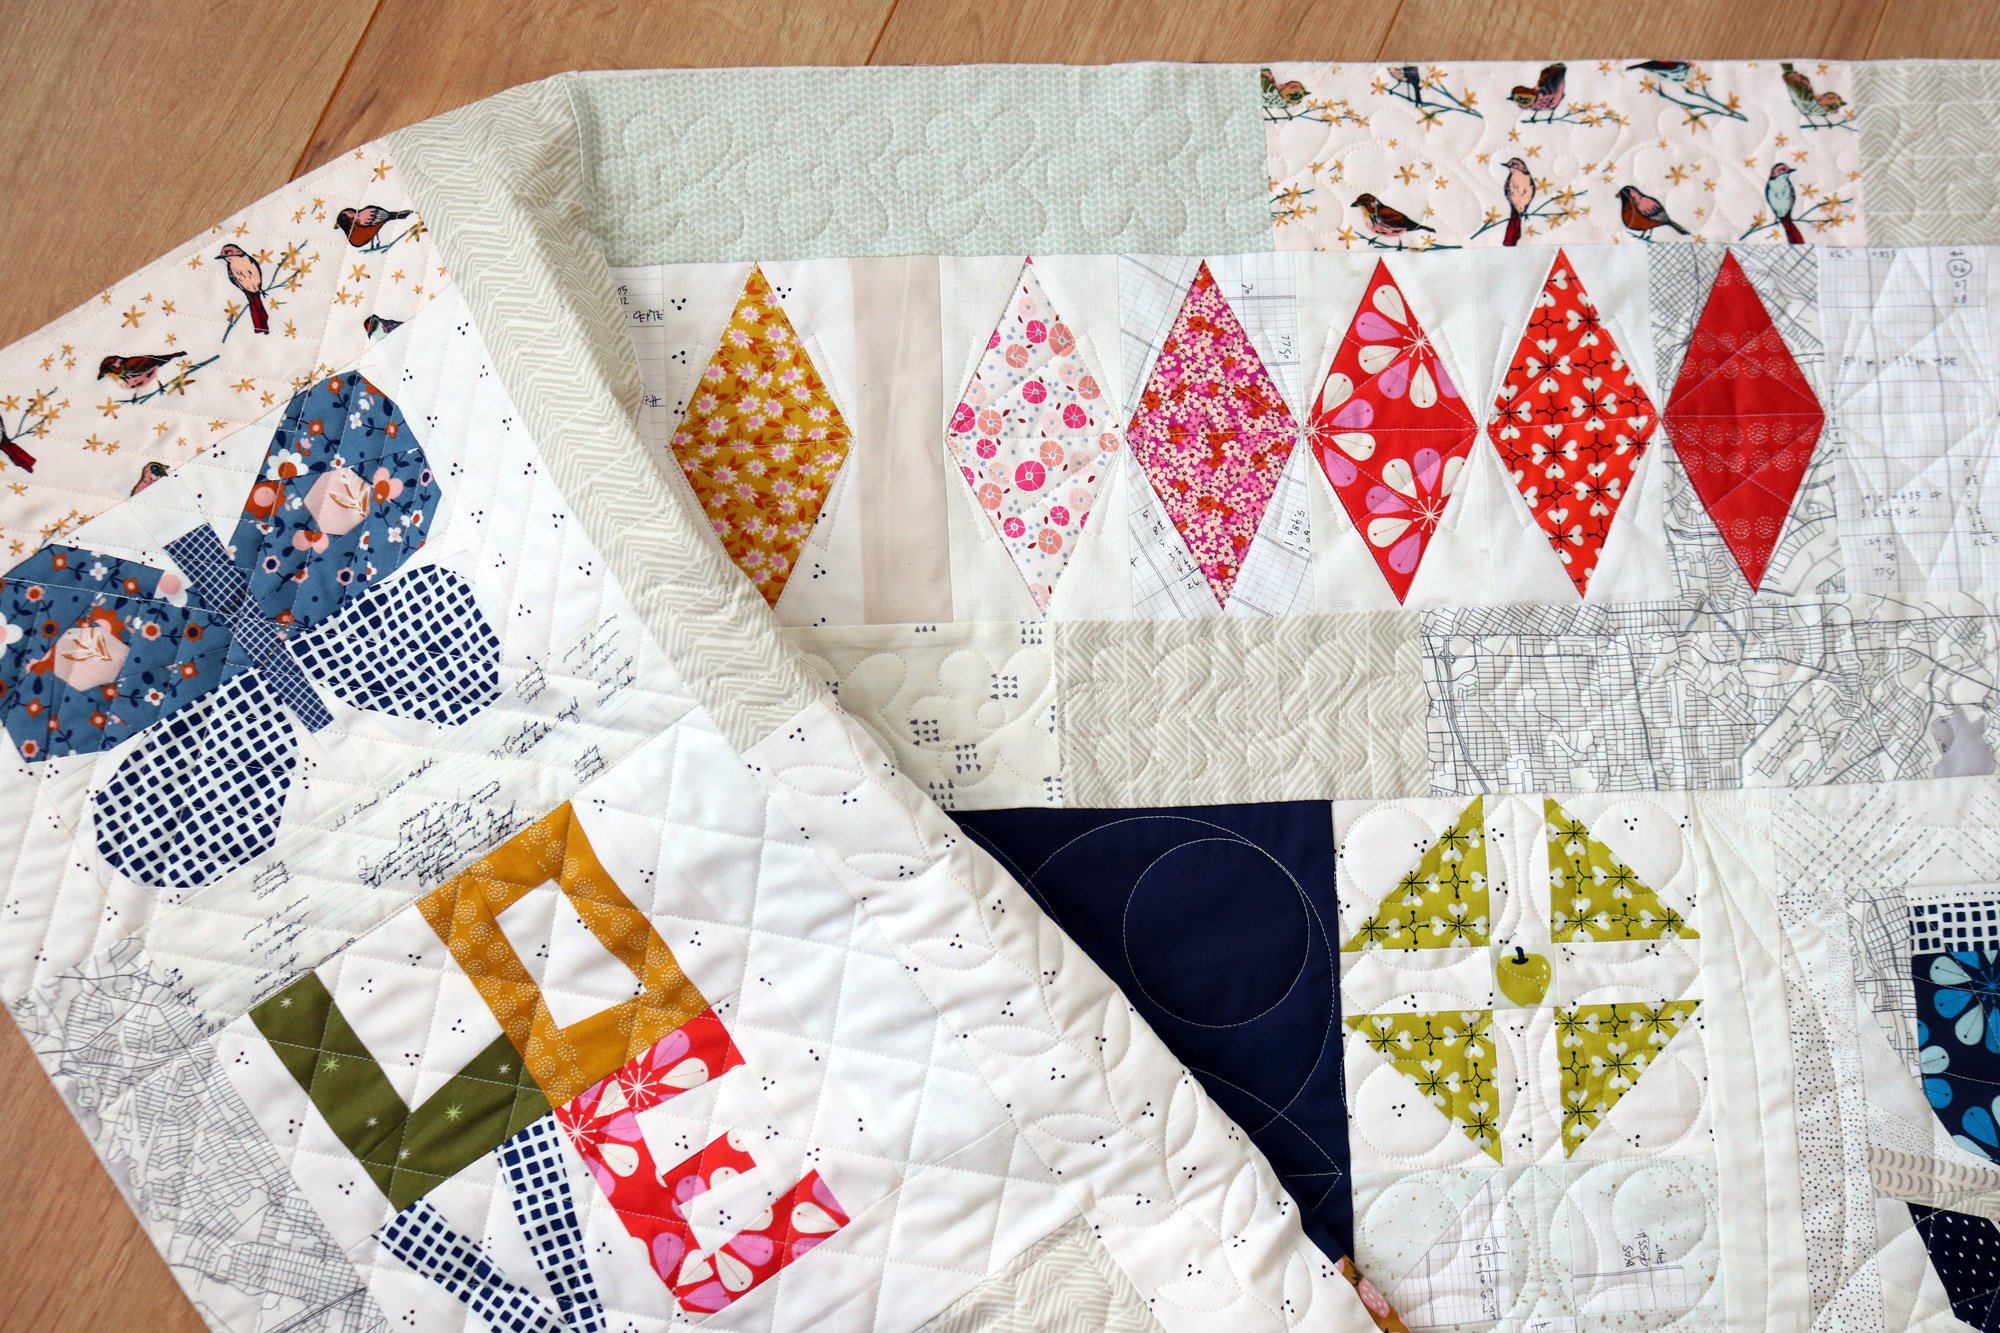 in the Quilting Studio, no. 21 — Stitched in Color